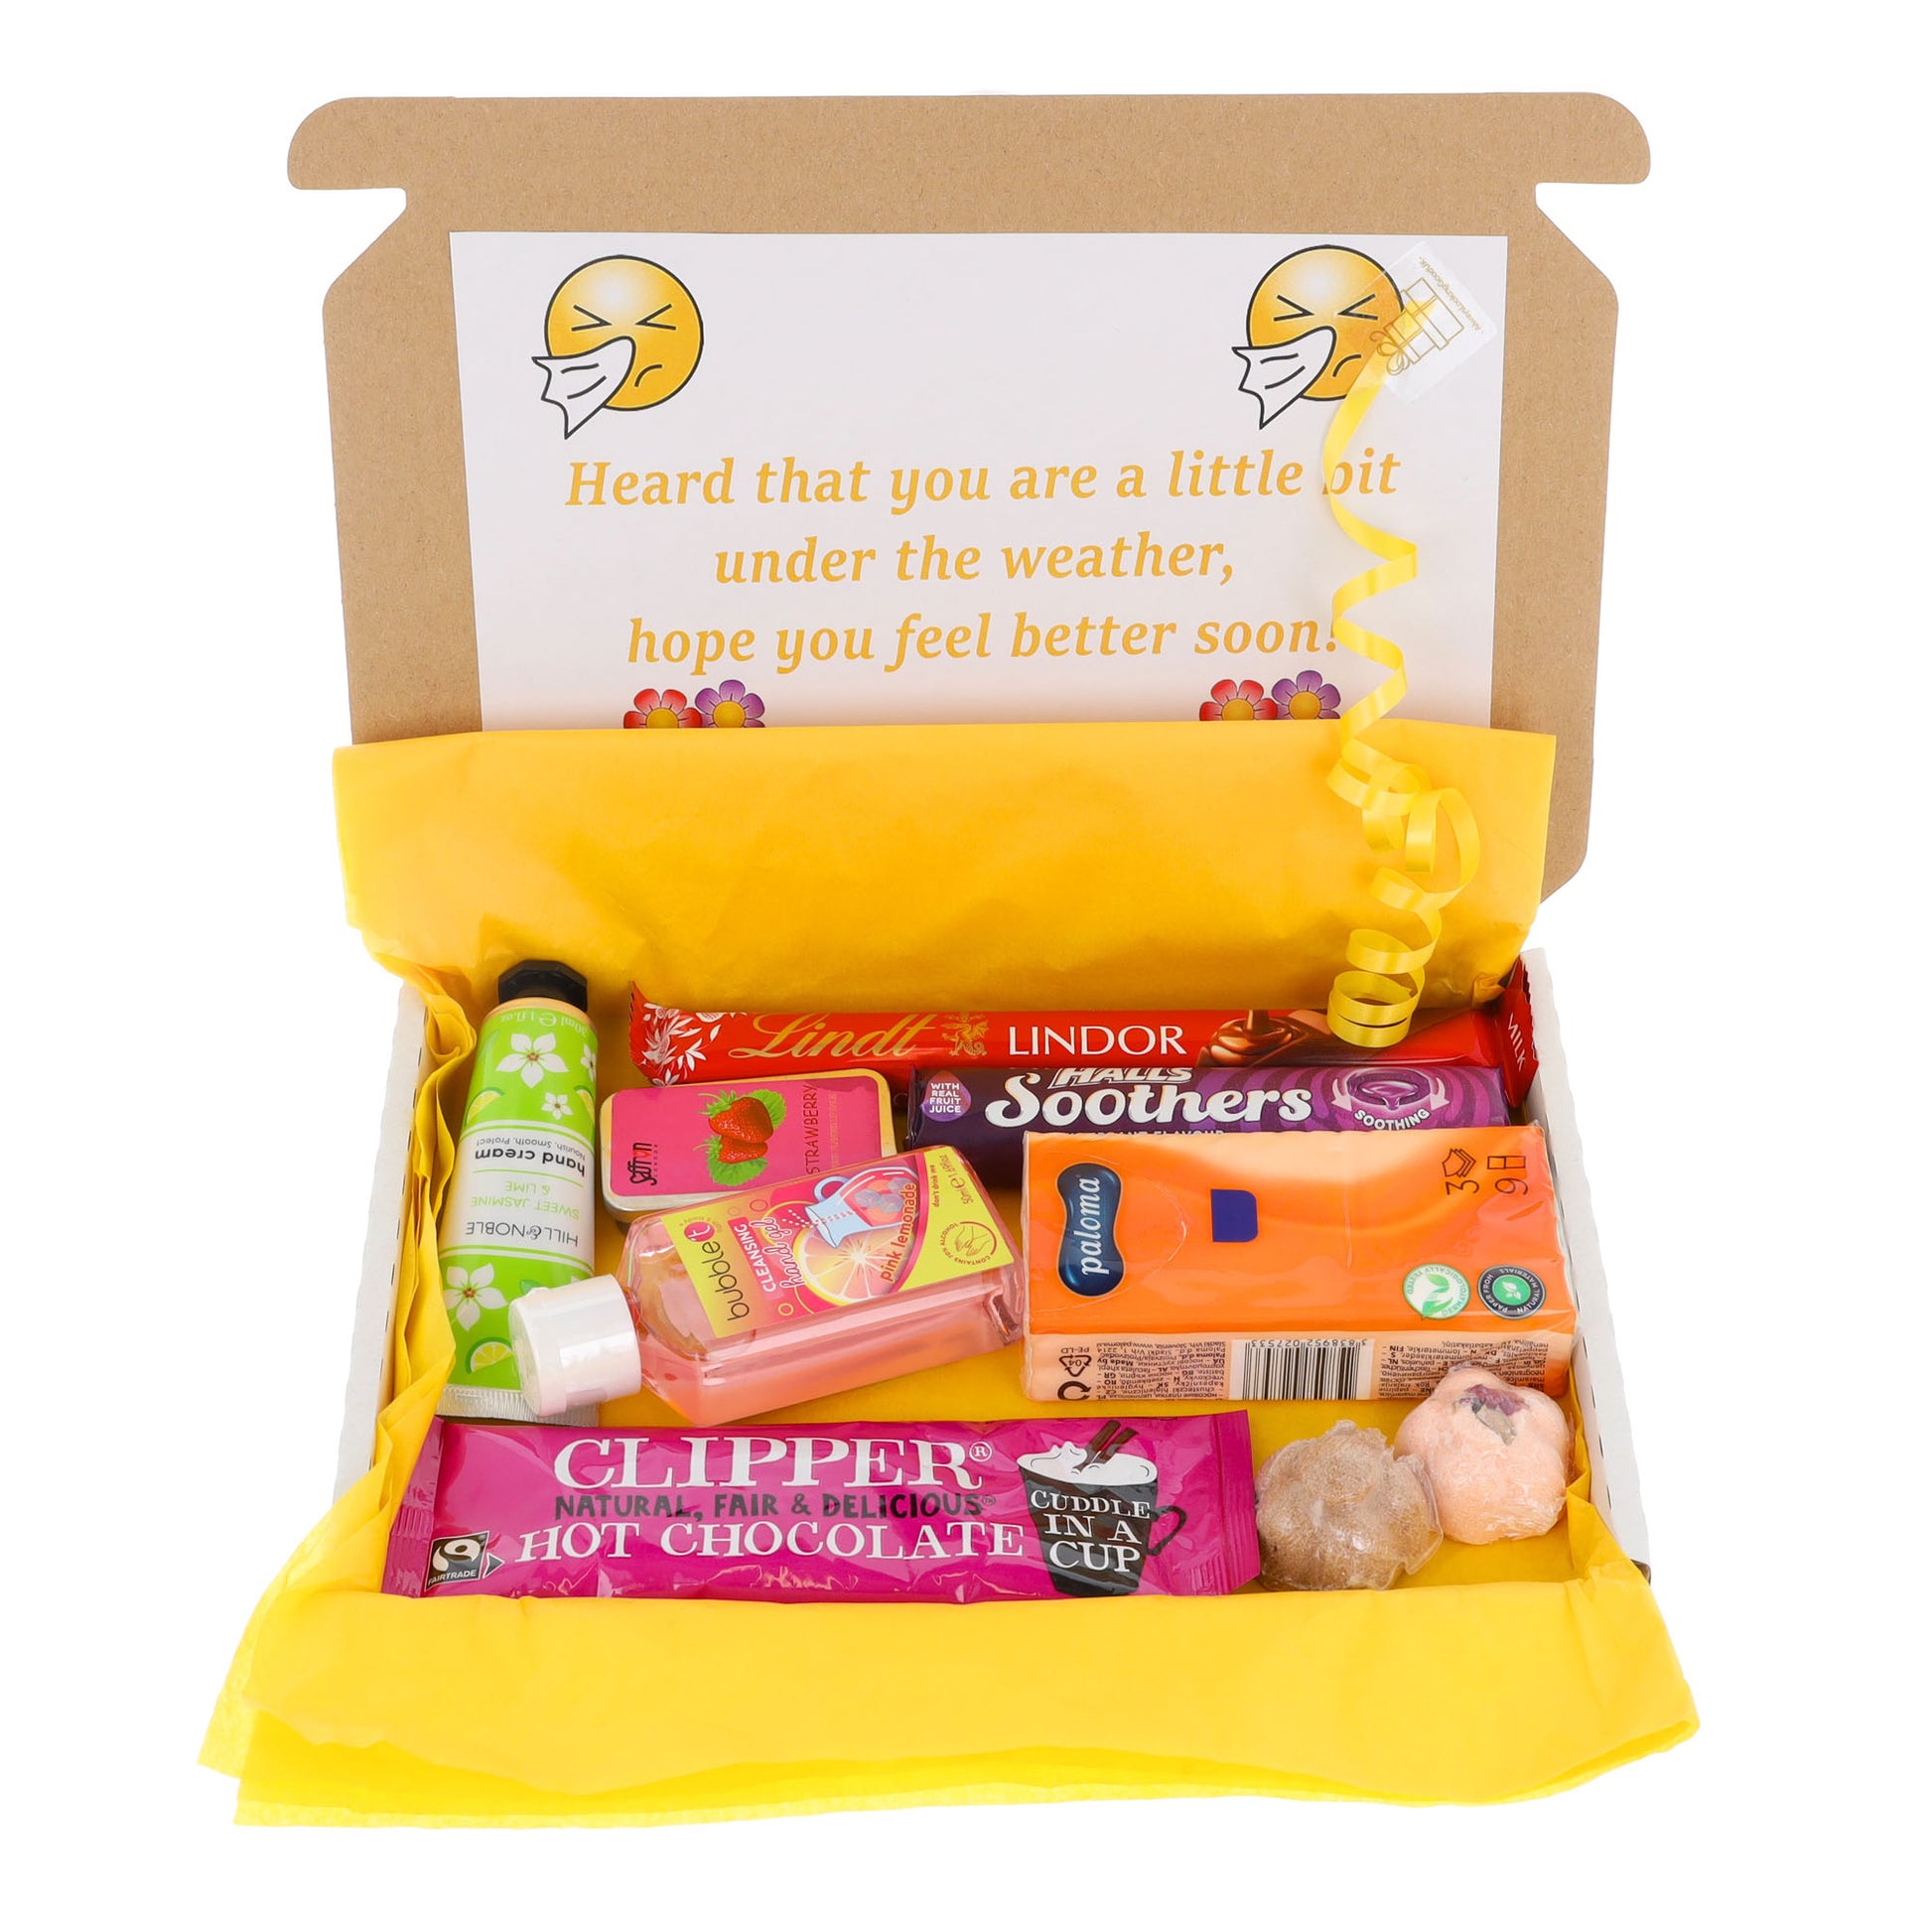 Get Well Soon Care Package Hug in a Box Letterbox Gift Set  - Always Looking Good - Hot Chocolate  